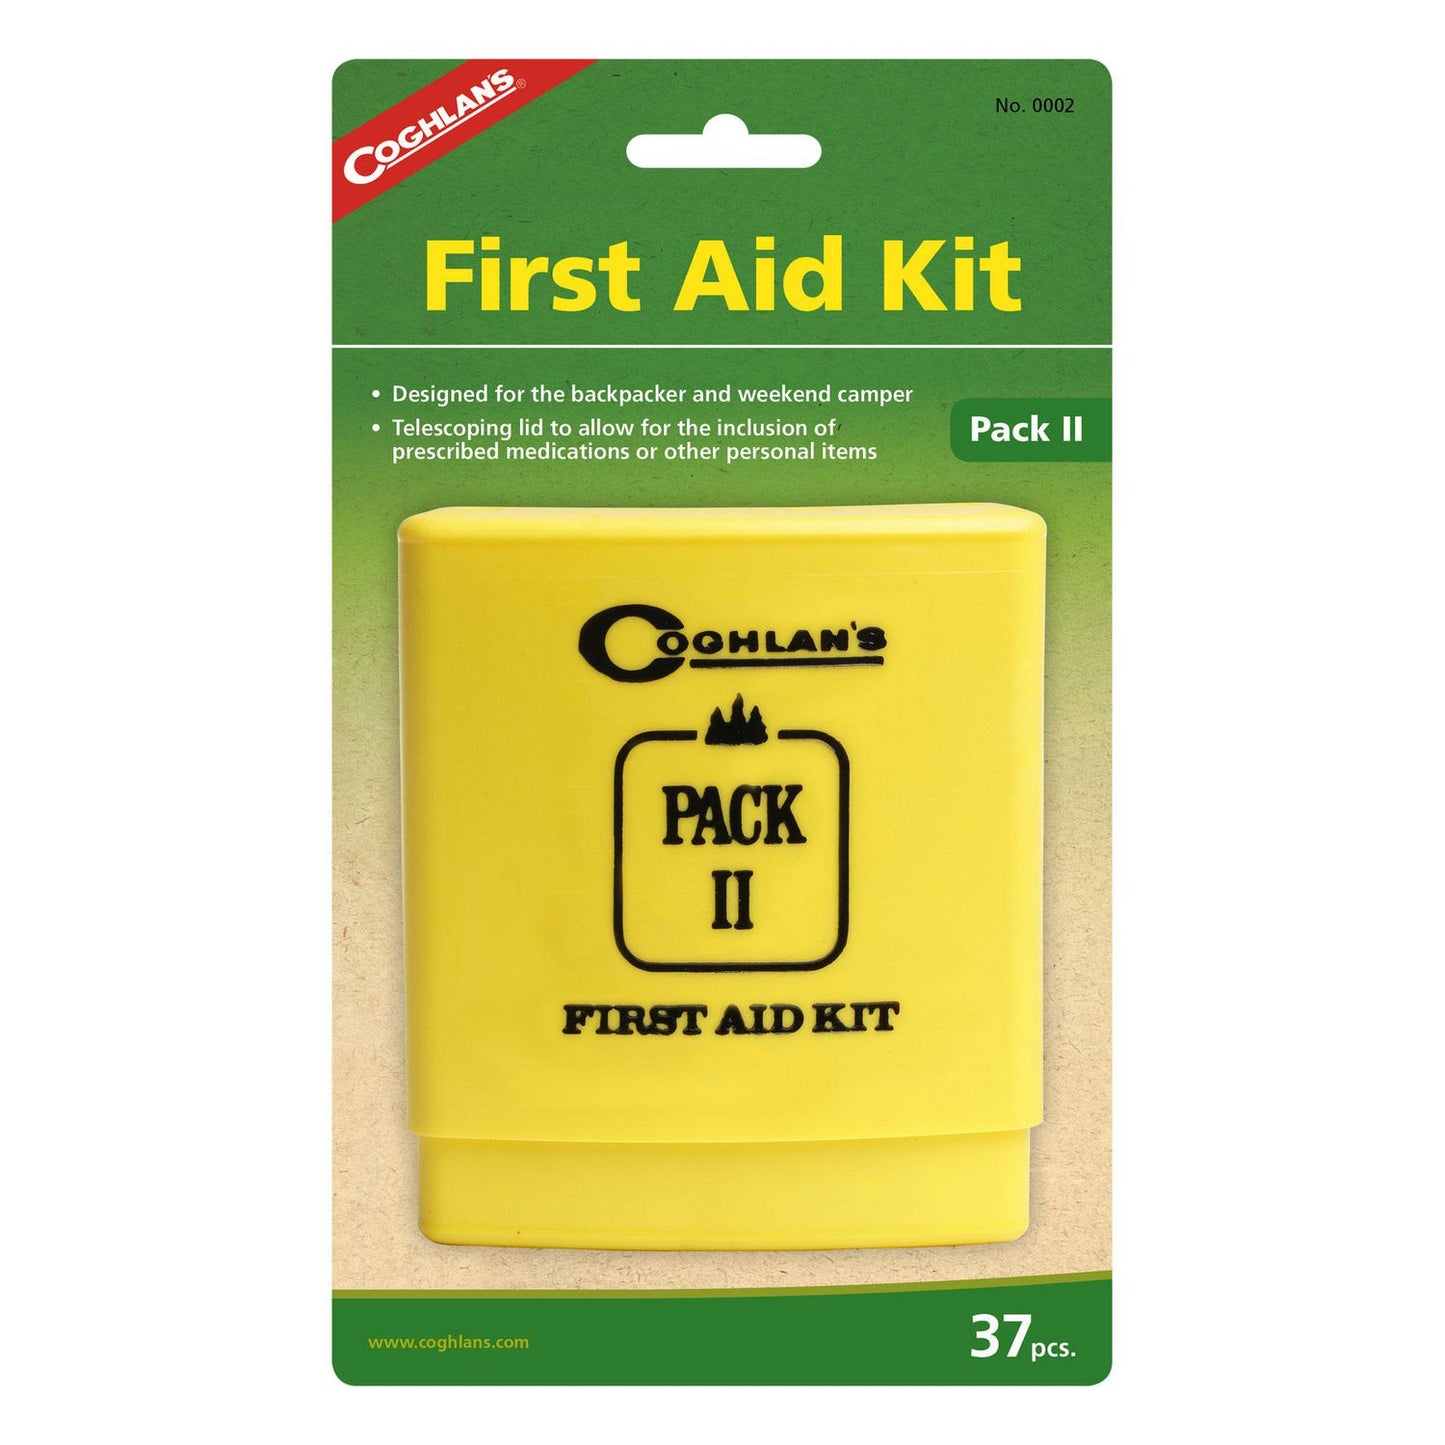 FIRST AID KIT PACK